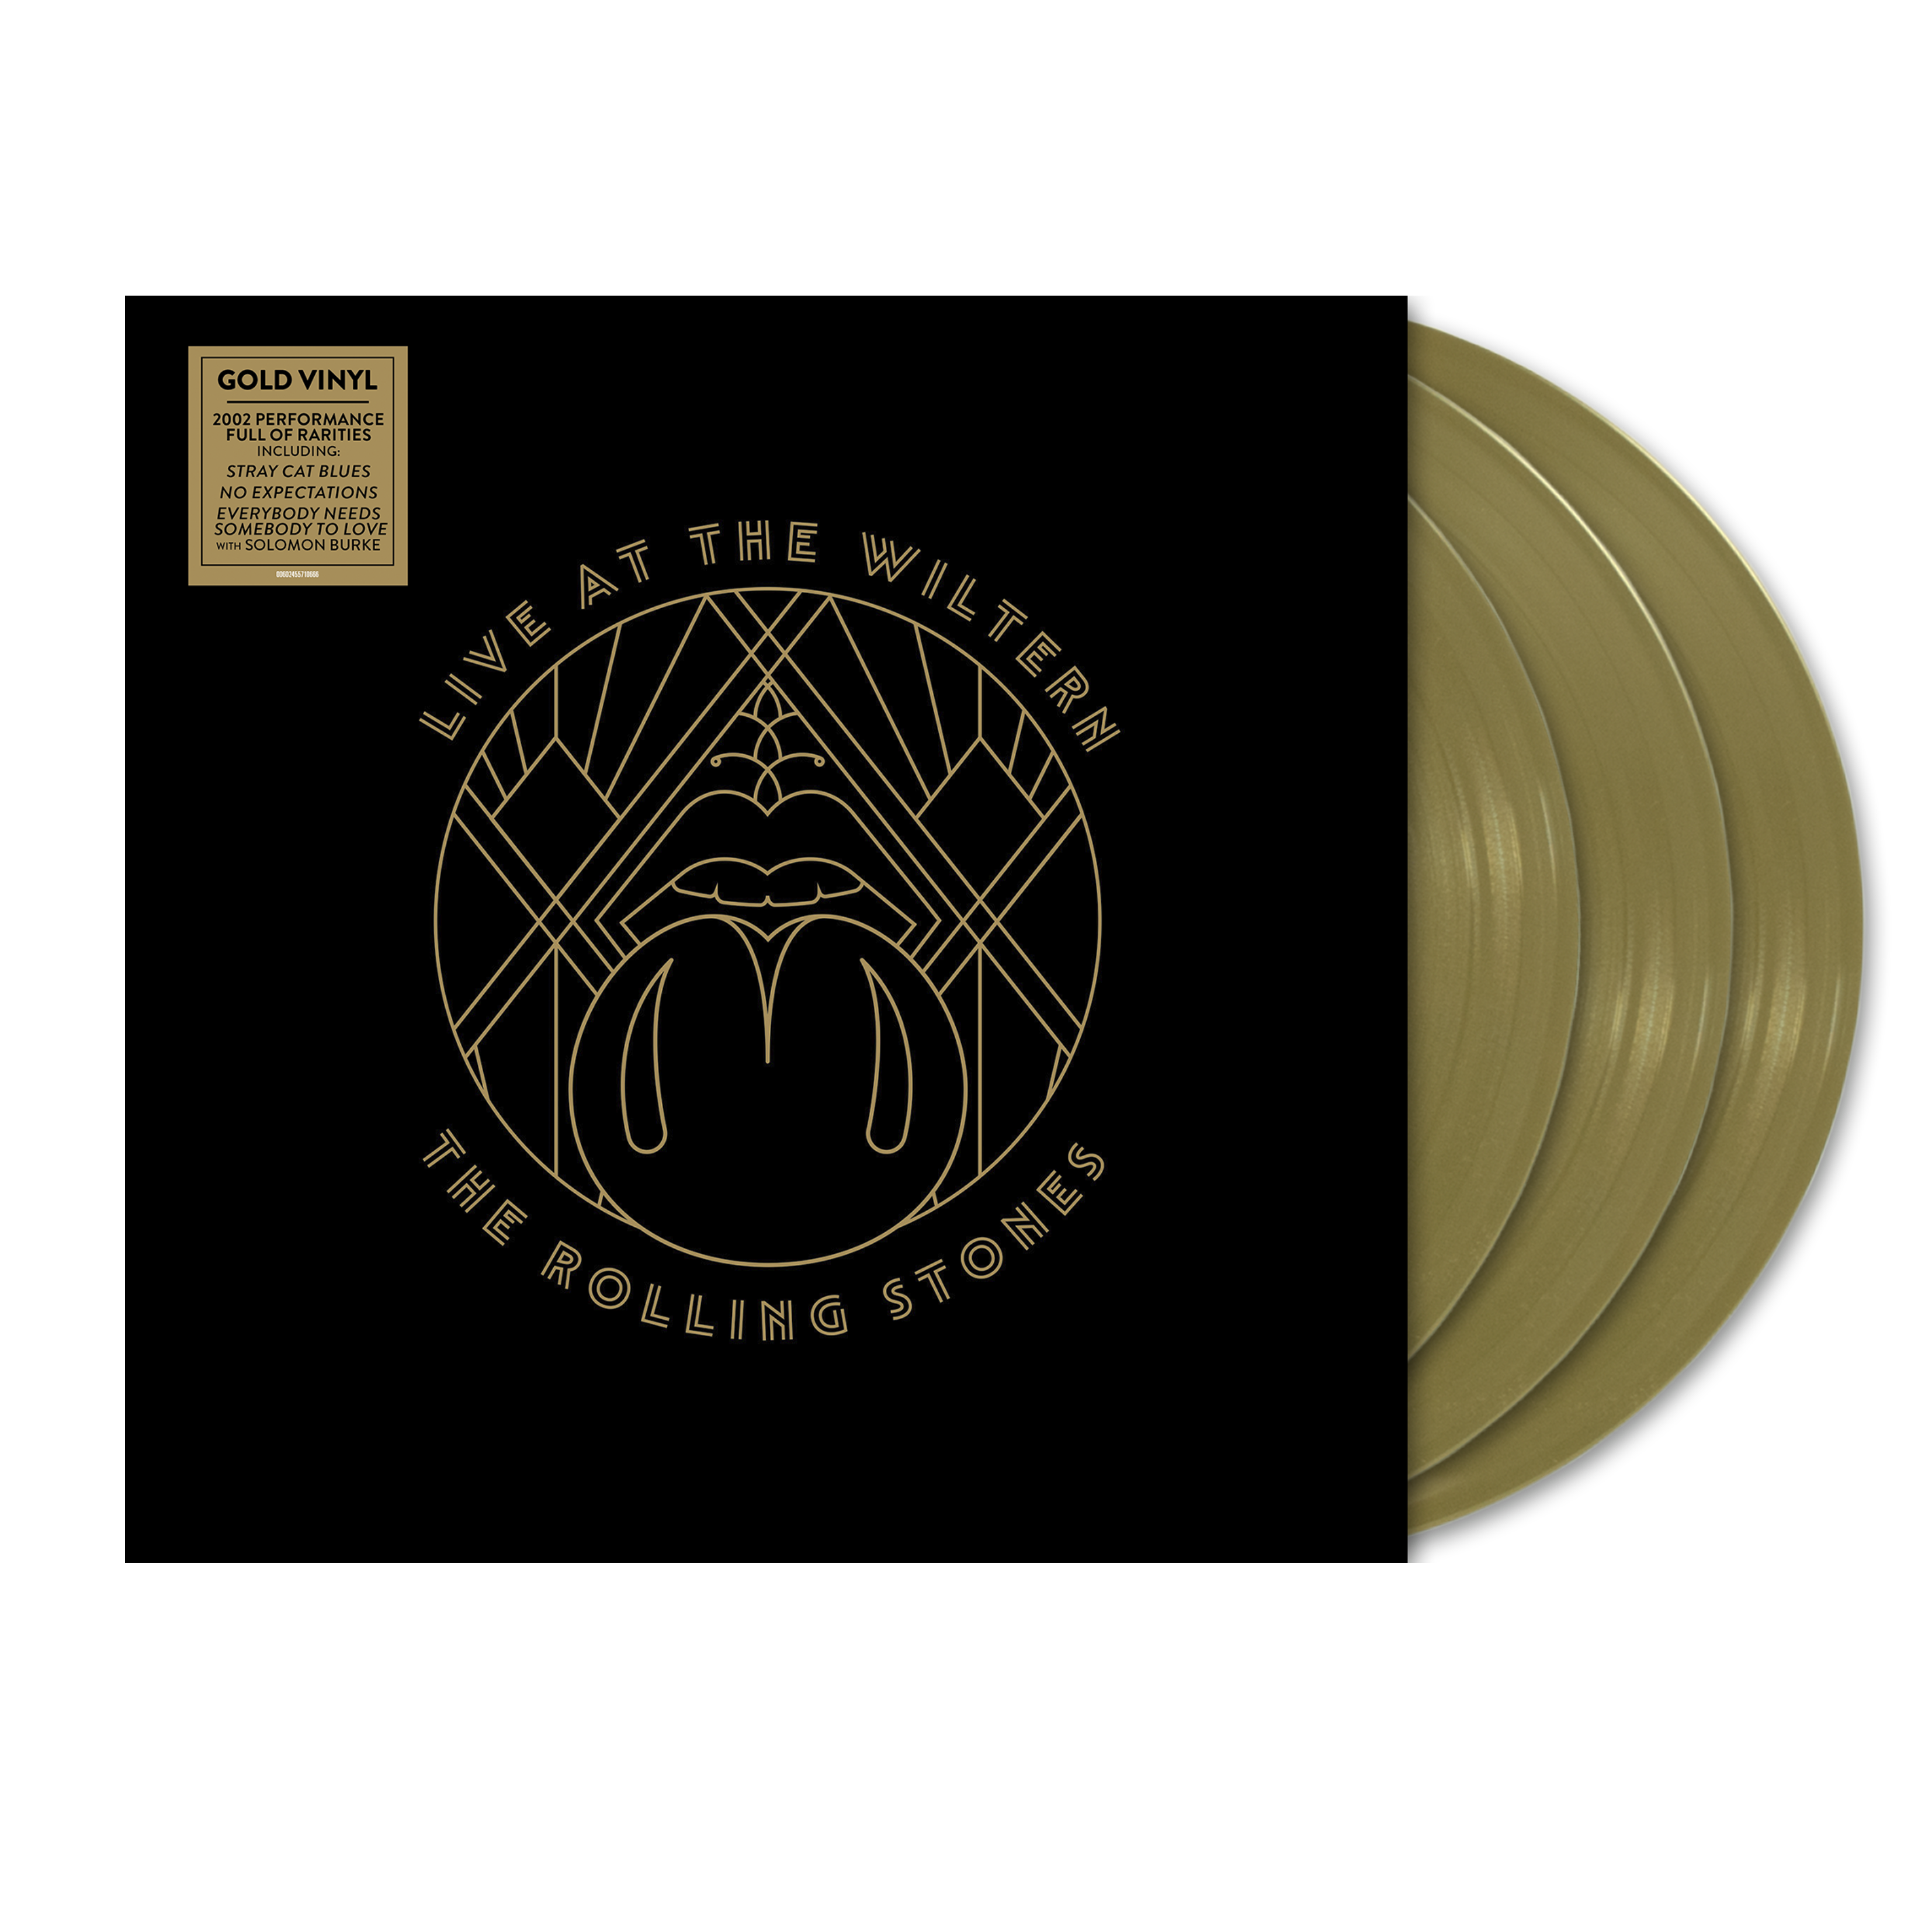 The Rolling Stones - Live At The Wiltern: Exclusive Gold Vinyl 3LP